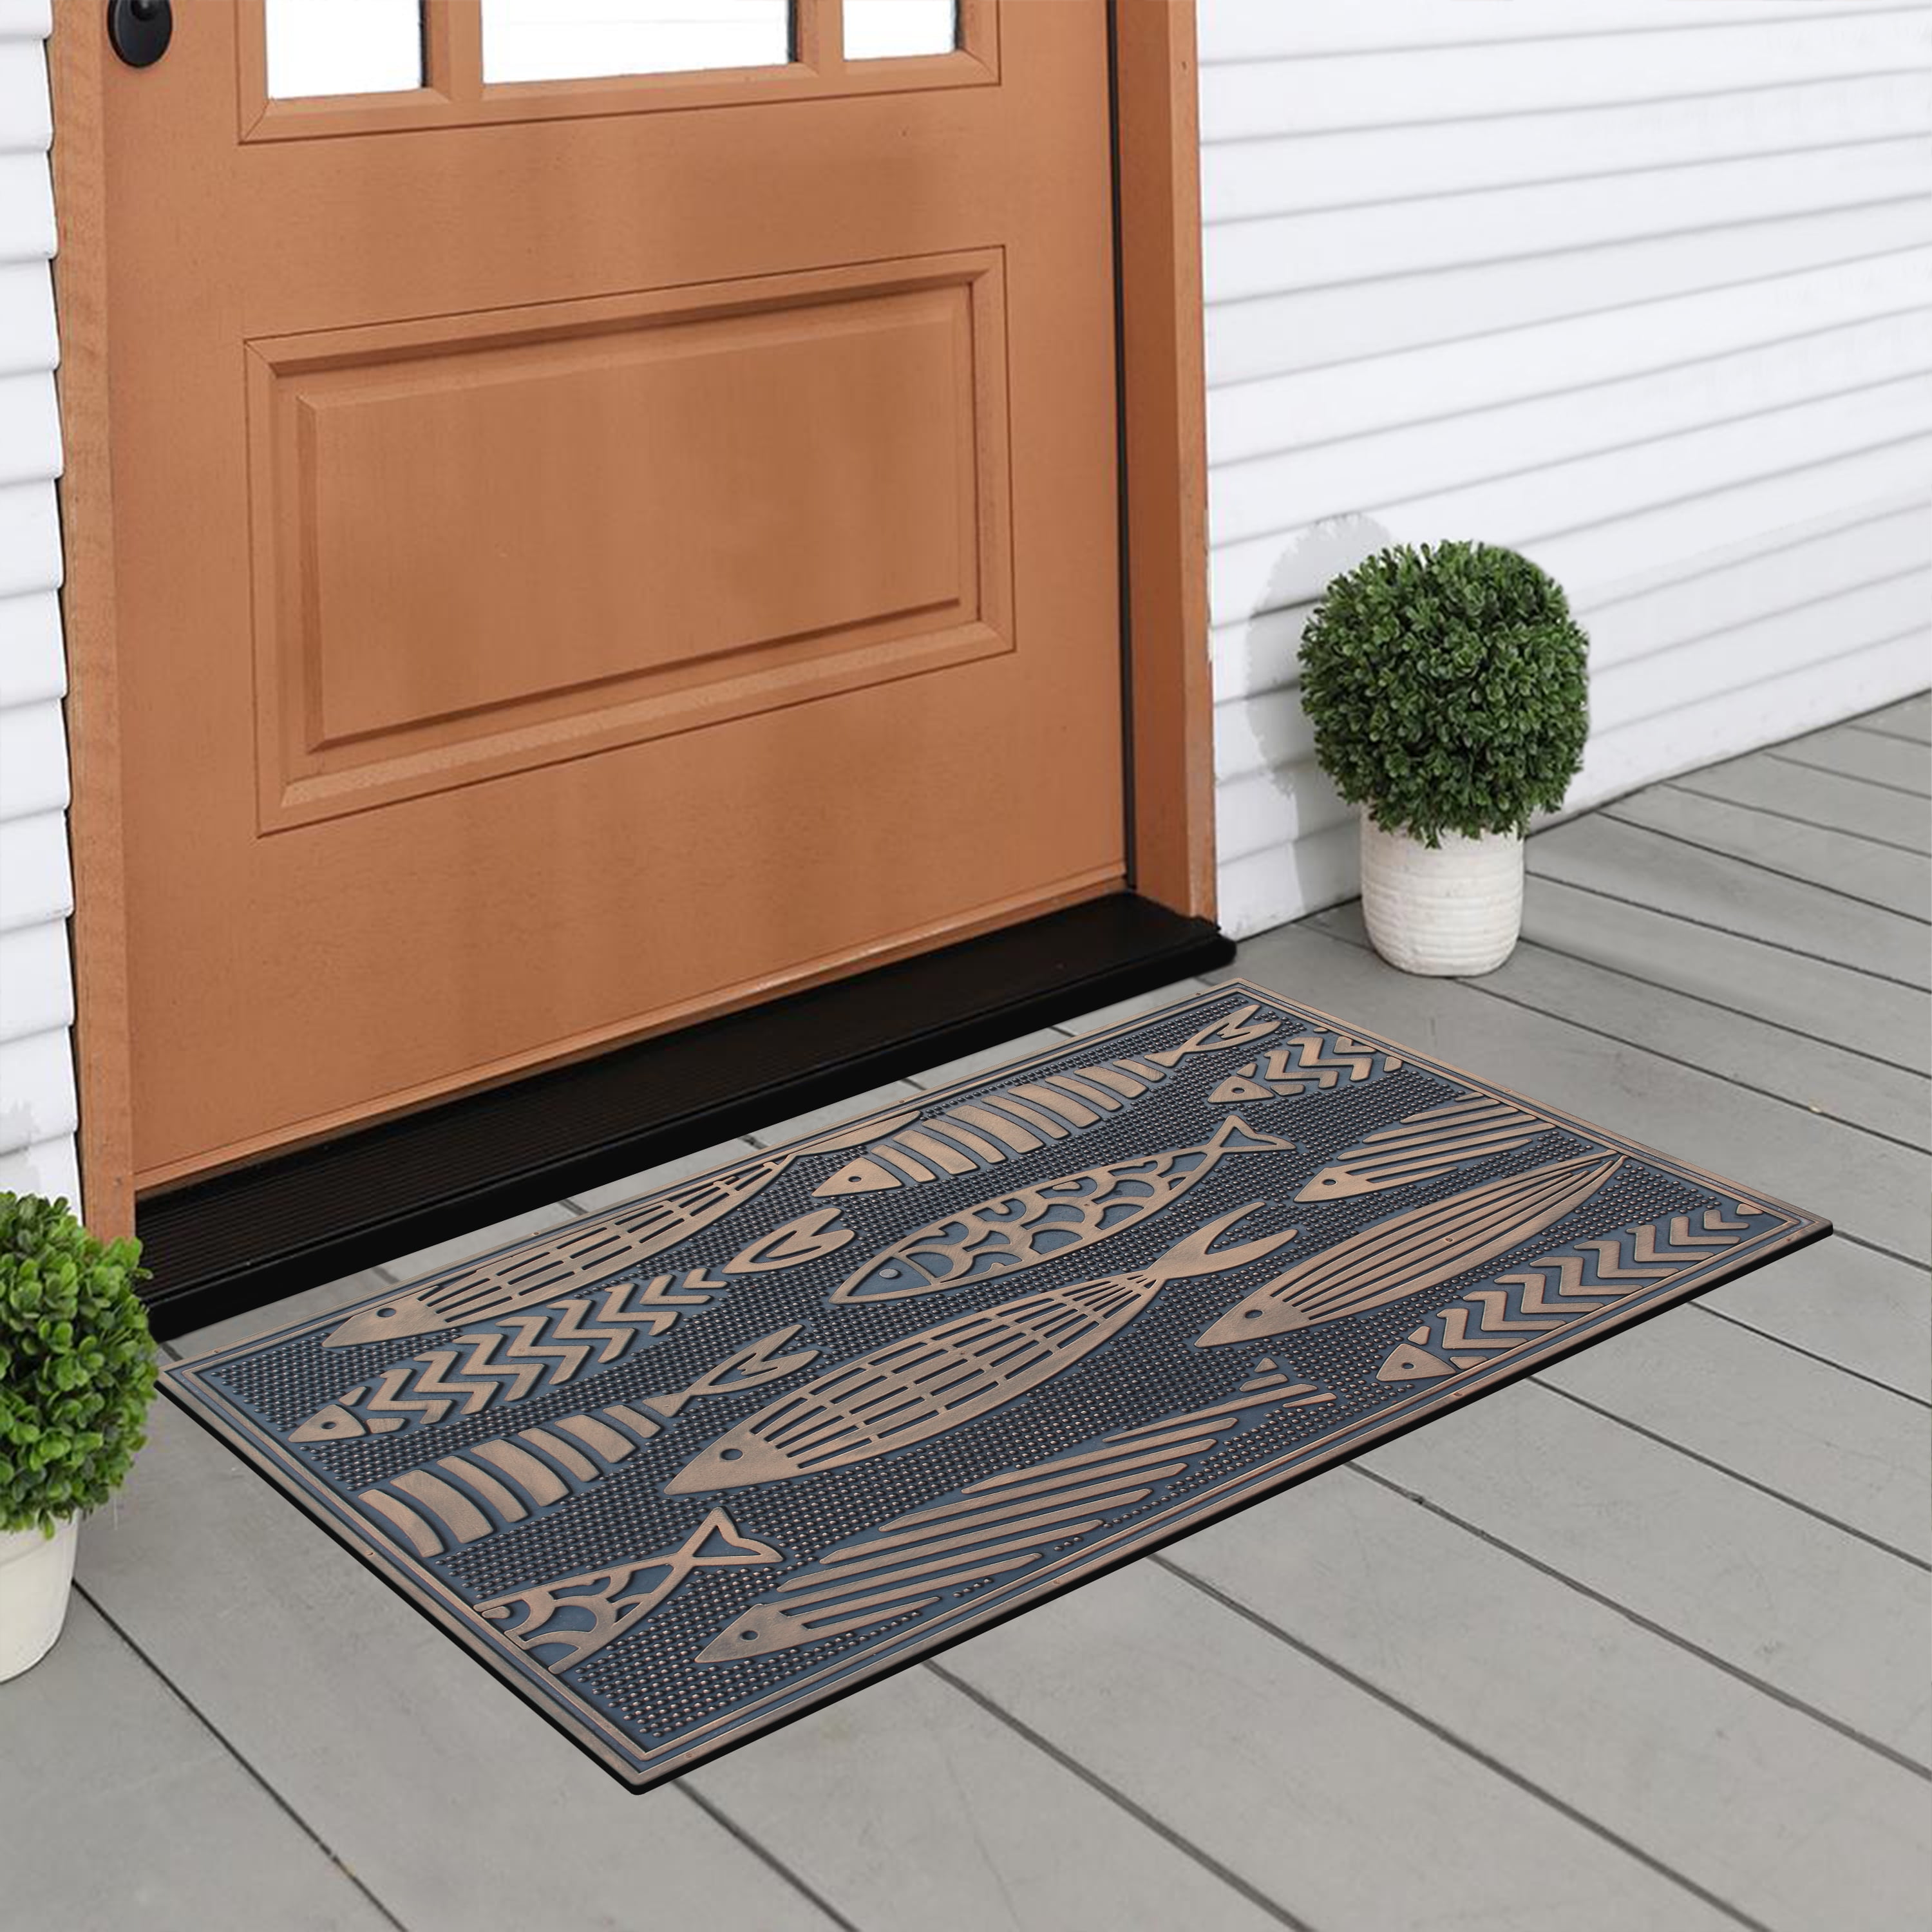 A1 Home Collections LLC A1hc Home Sweet Home Rubber Pin Mat Heavy Duty Doormat, Copper - 24 inchx39 inch, Size: 24x39 - Copper